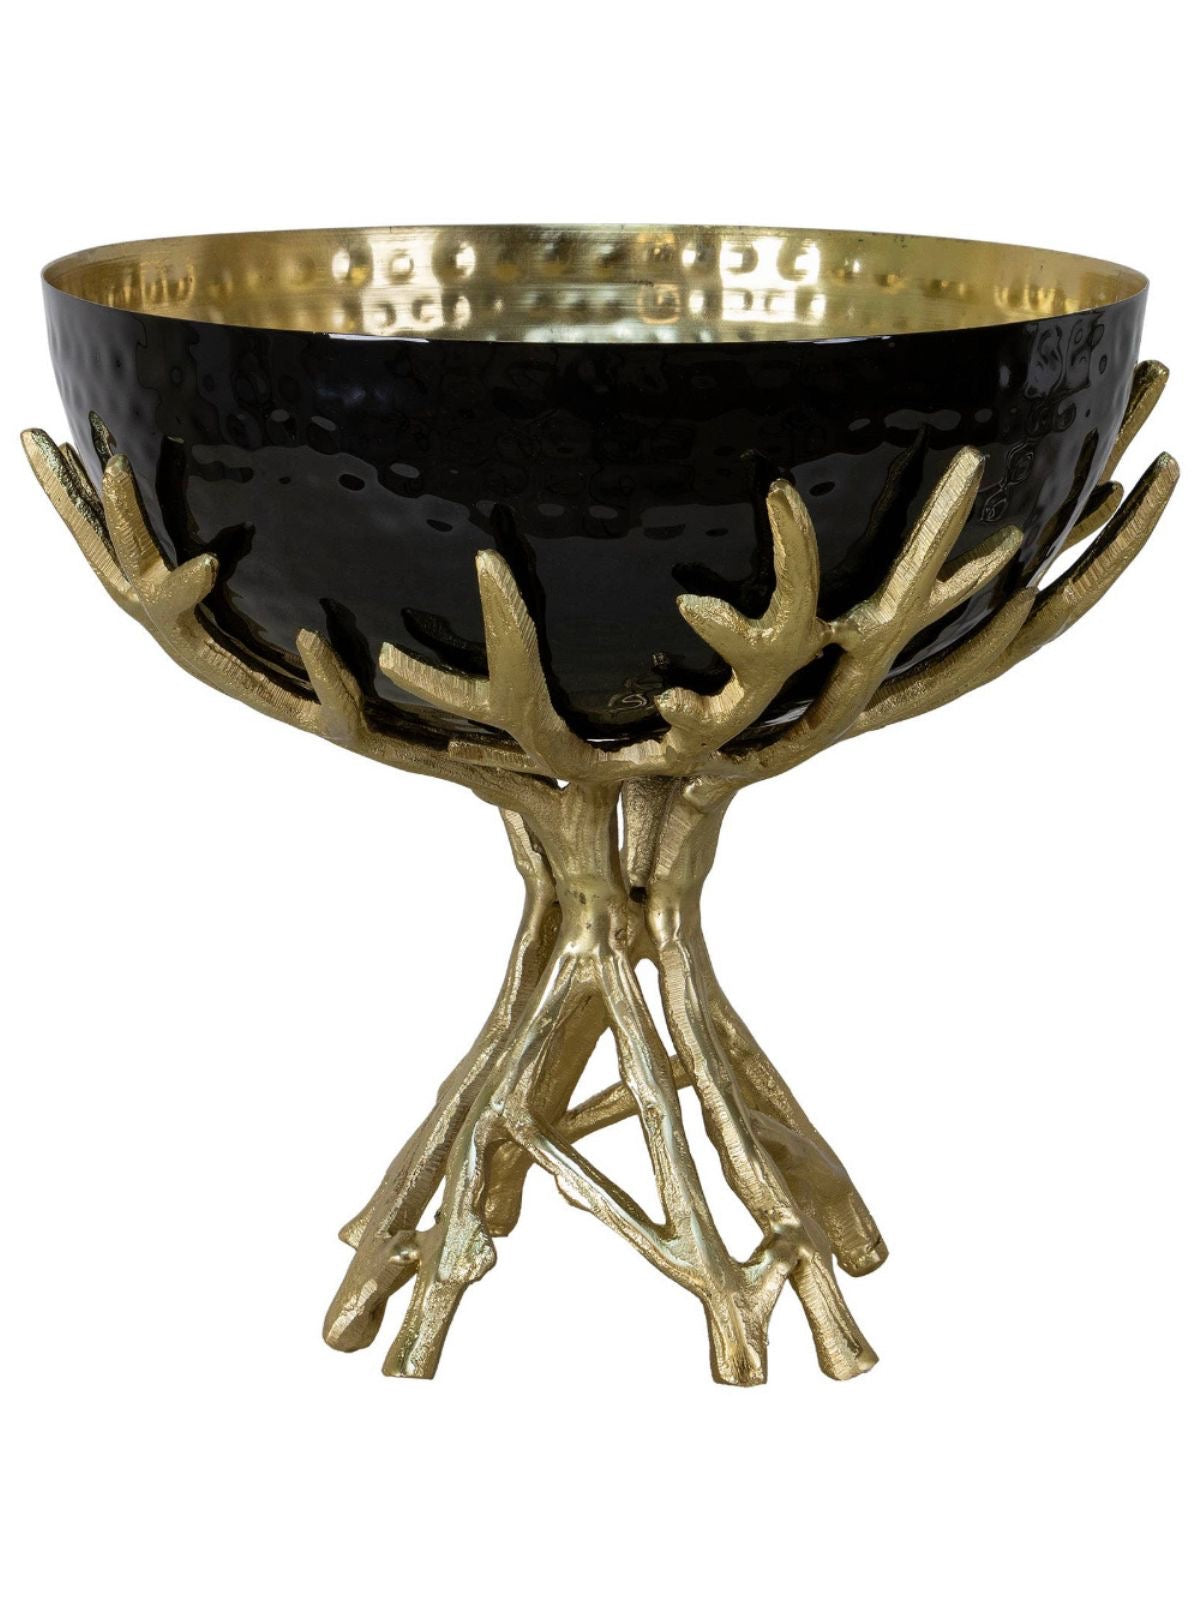 Decorative black bowl with gold interior sitting on a stunning golden stainless steel branch stand.